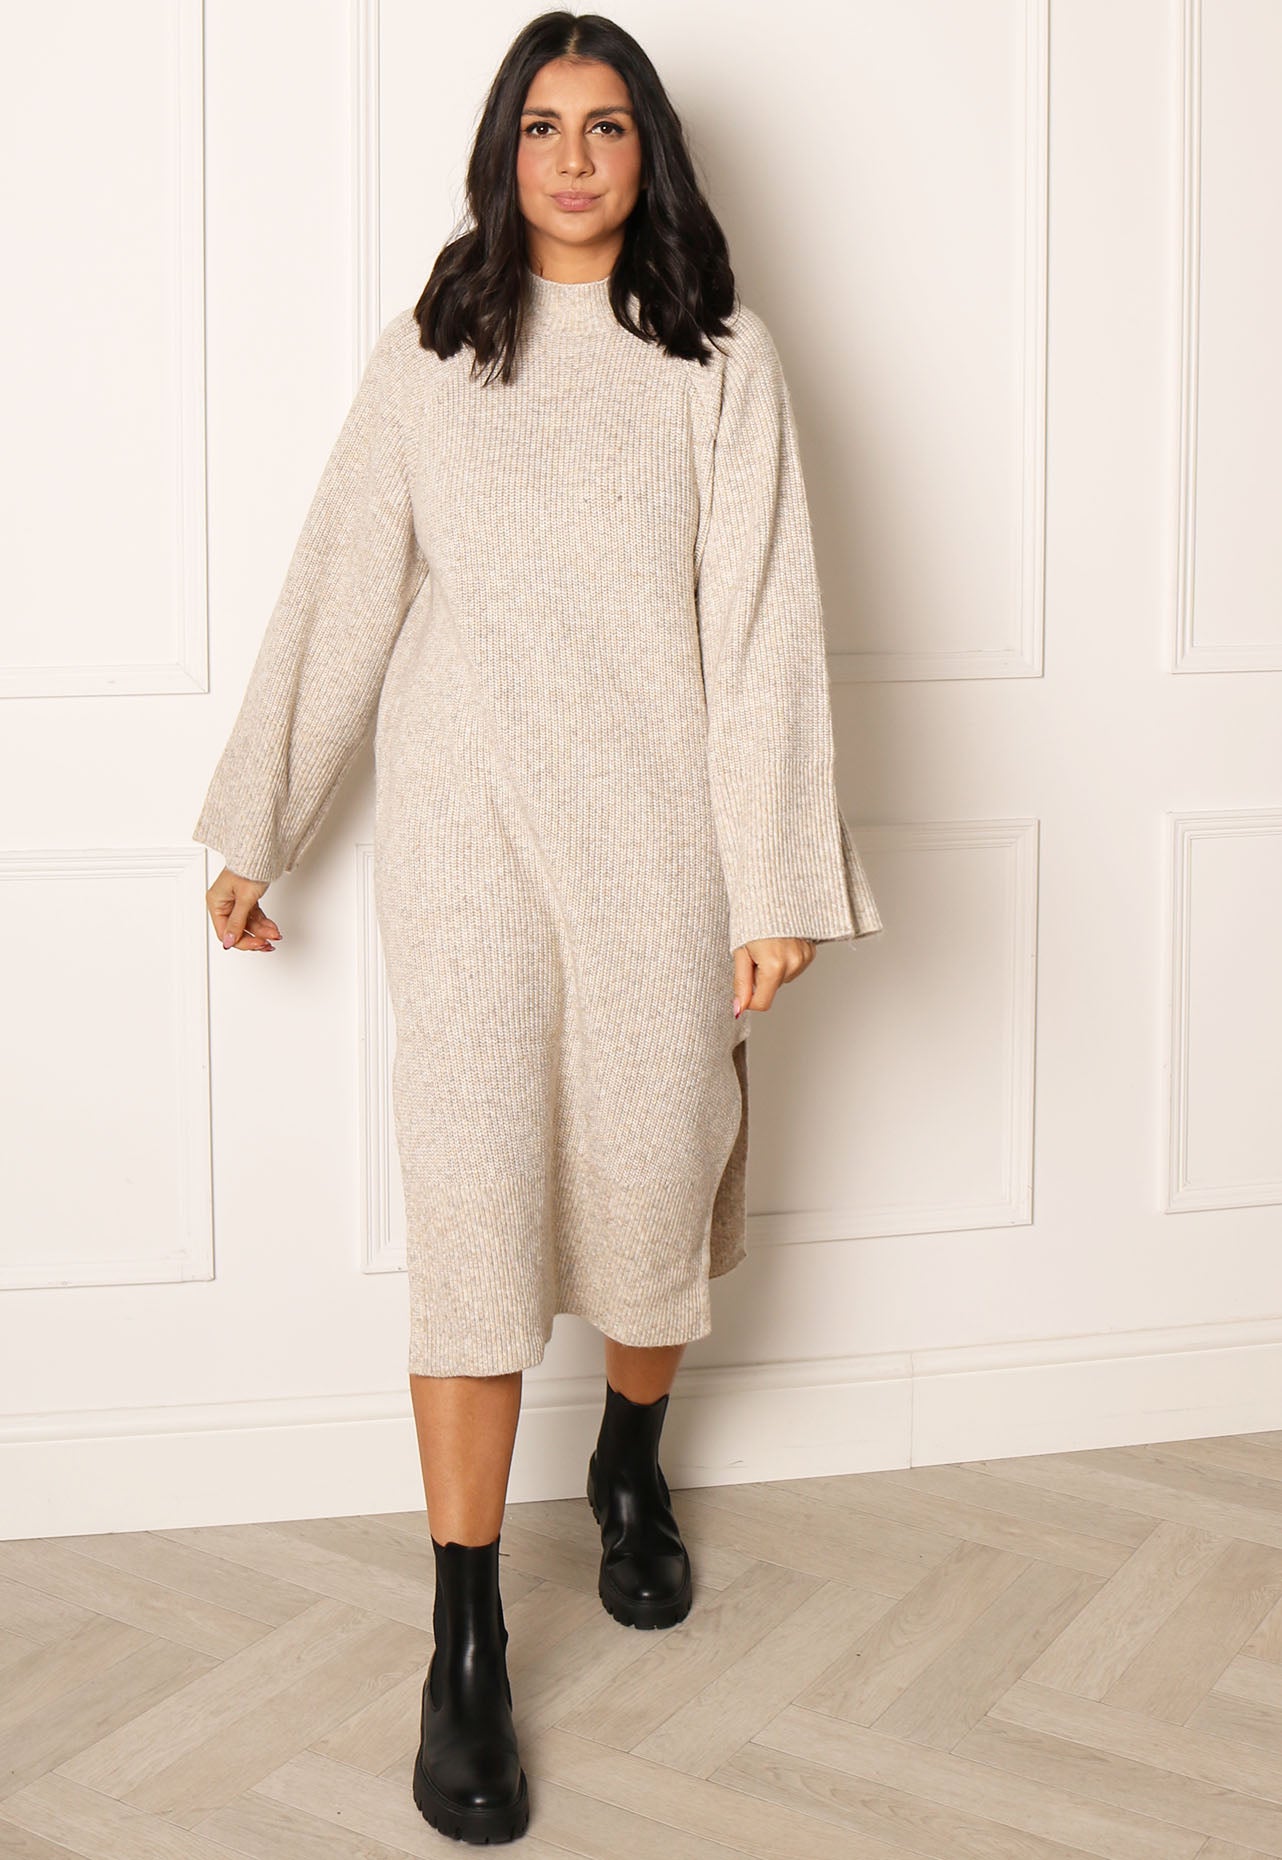 PIECES Jade Oversized Chunky Knit Long Sleeve High Neck Jumper Dress in Cream Melange - One Nation Clothing